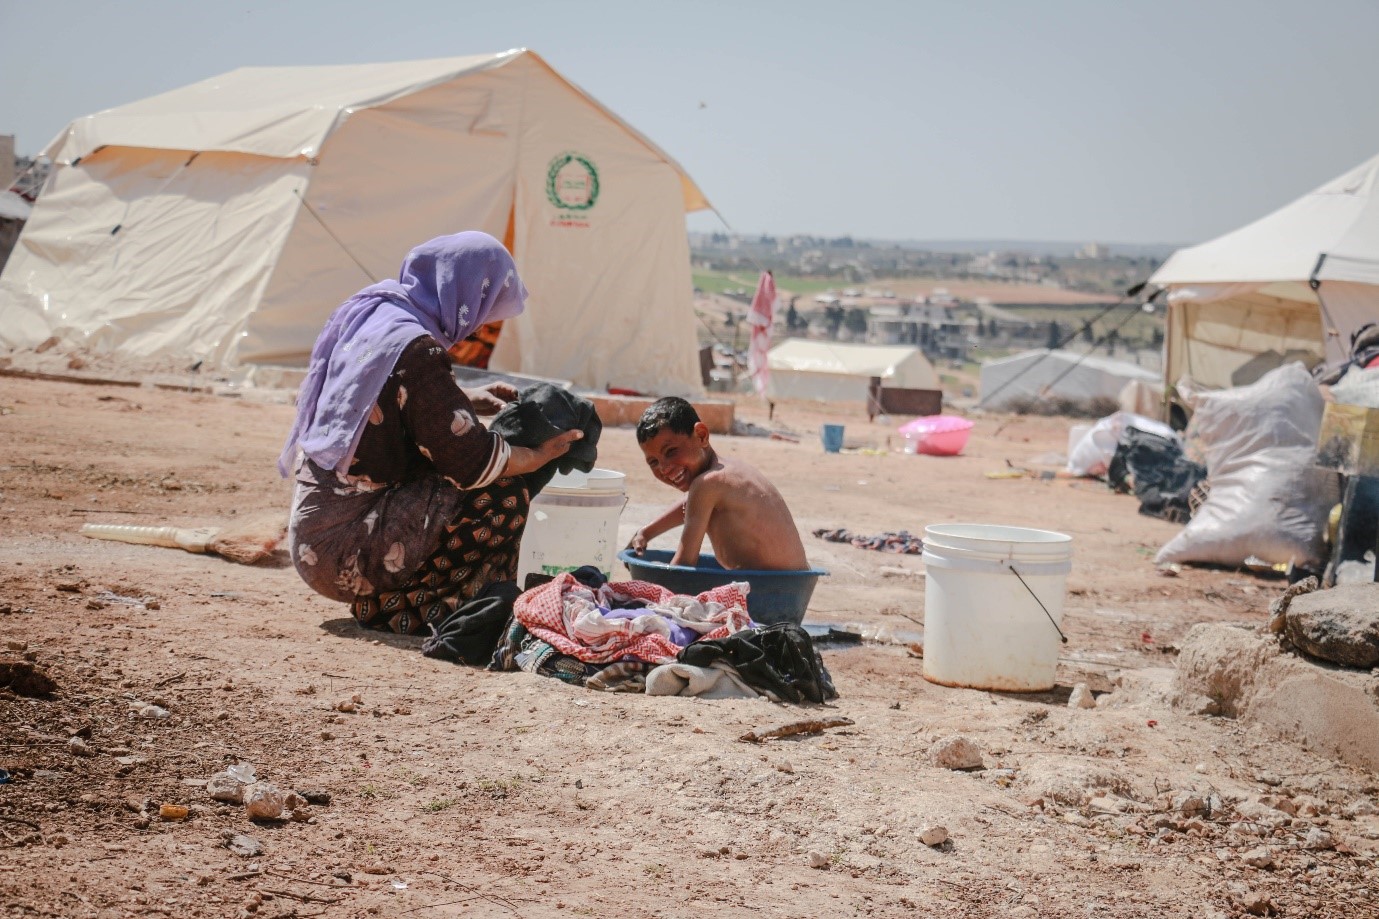 A mother and her son in a refugee camp